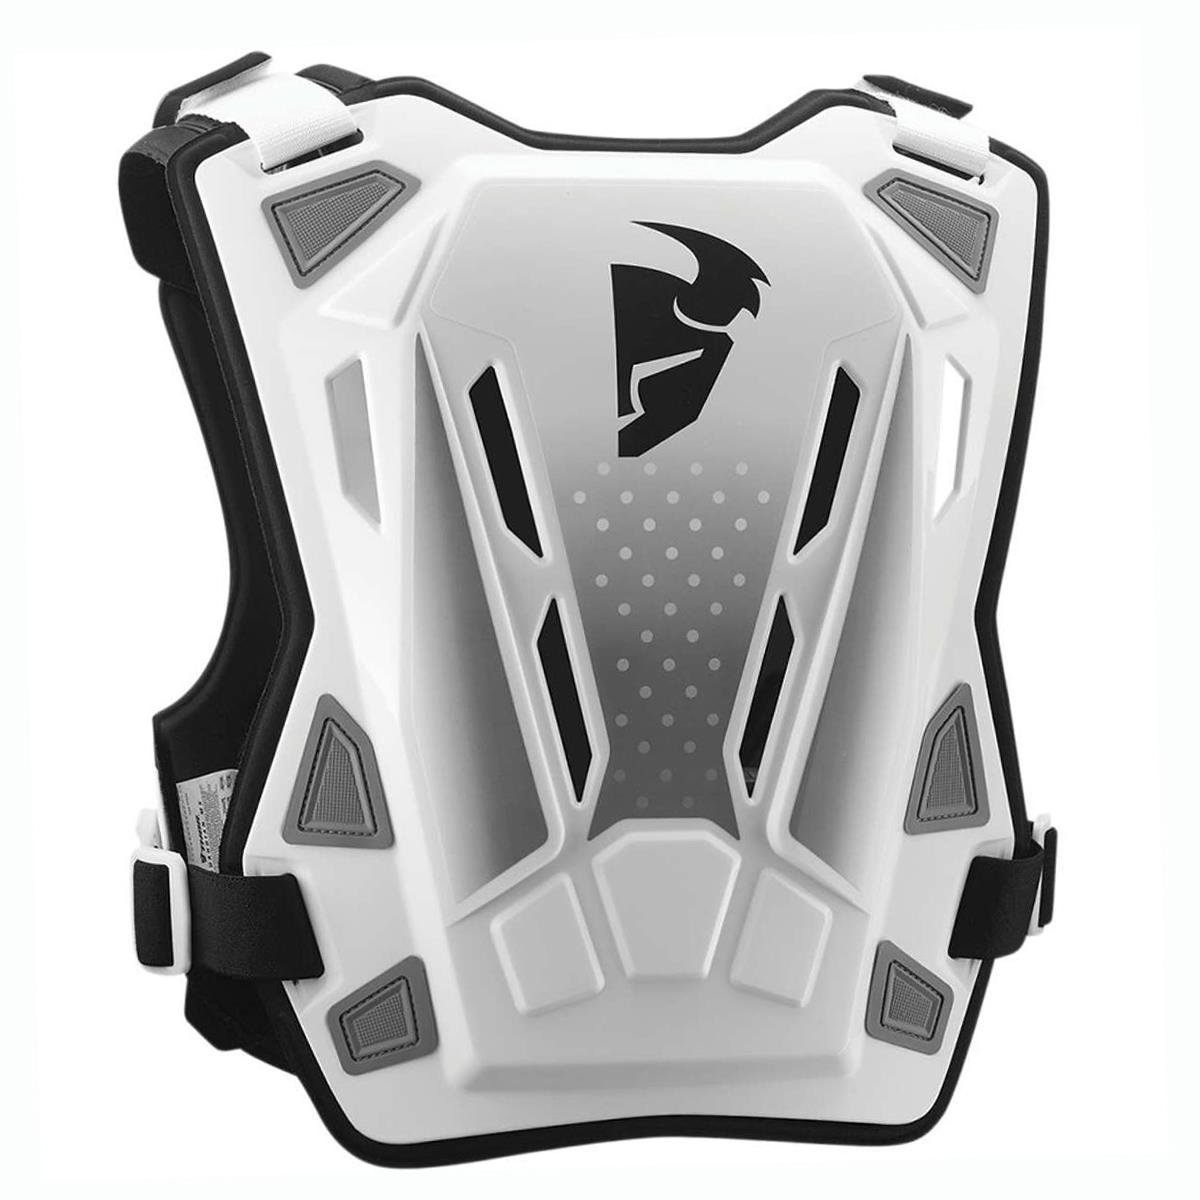 THOR GUARDIAN ADULTS MENS MOTOCROSS BODY ARMOUR MX RACING CHEST SPINE PROTECTION 